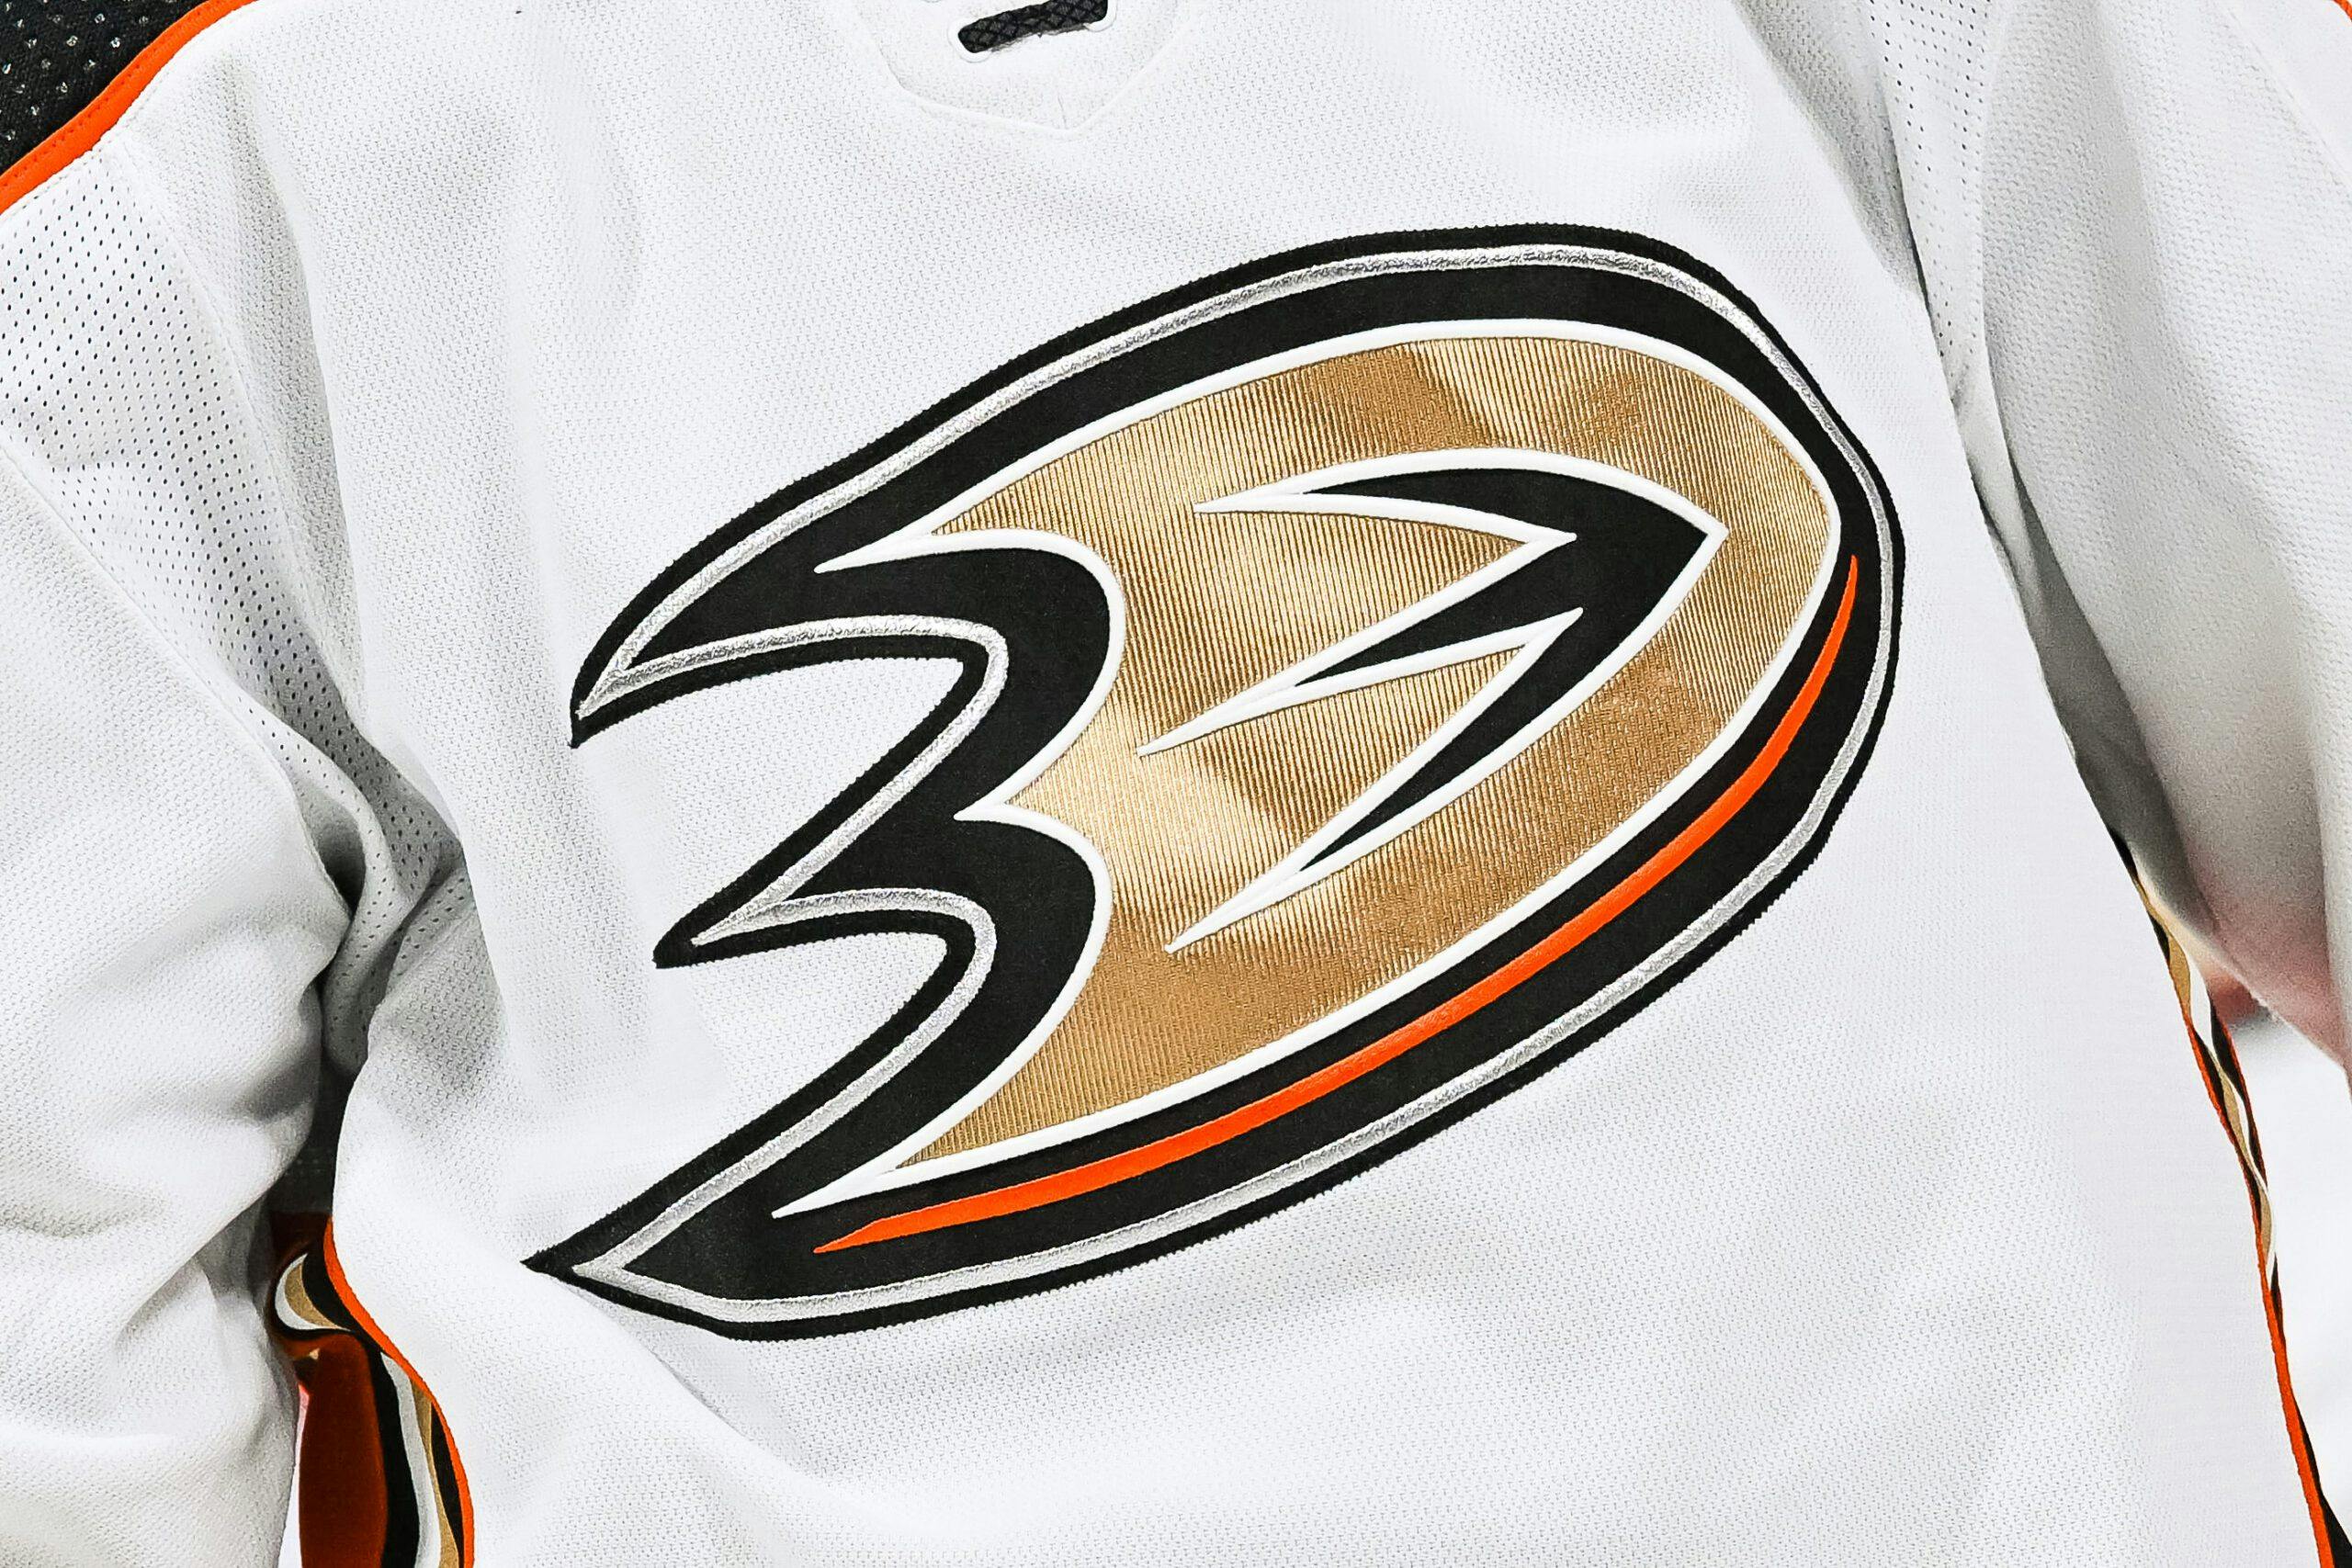 Anaheim Ducks assistant coach Mike Stothers diagnosed with cancer